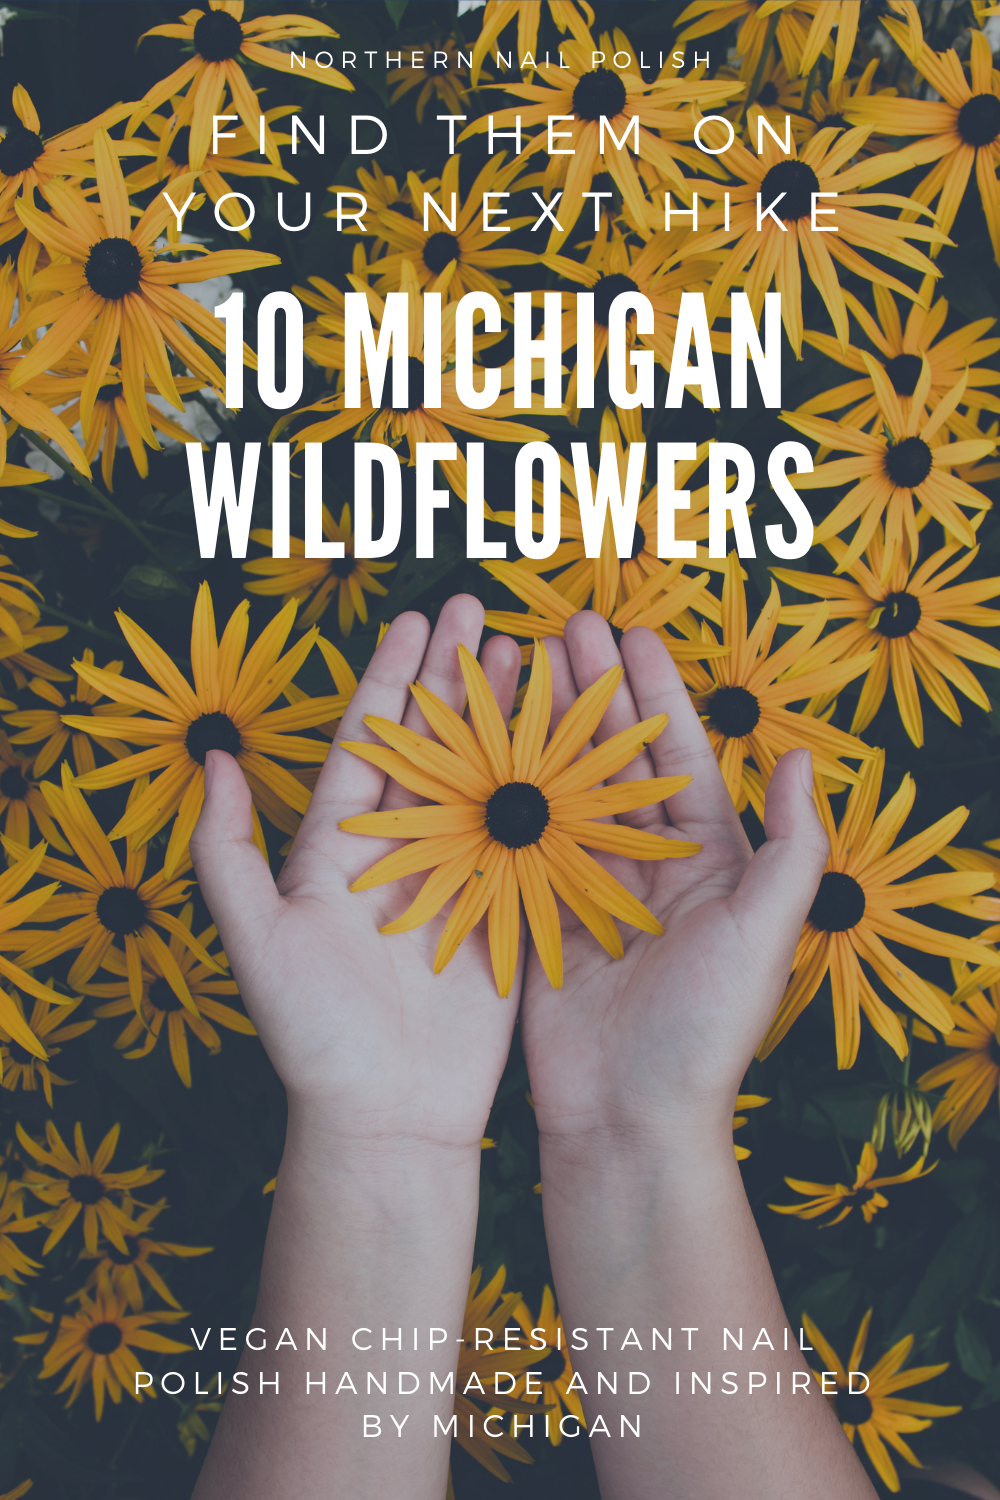 10 michigan wildflowers to find on your next hike 2.png